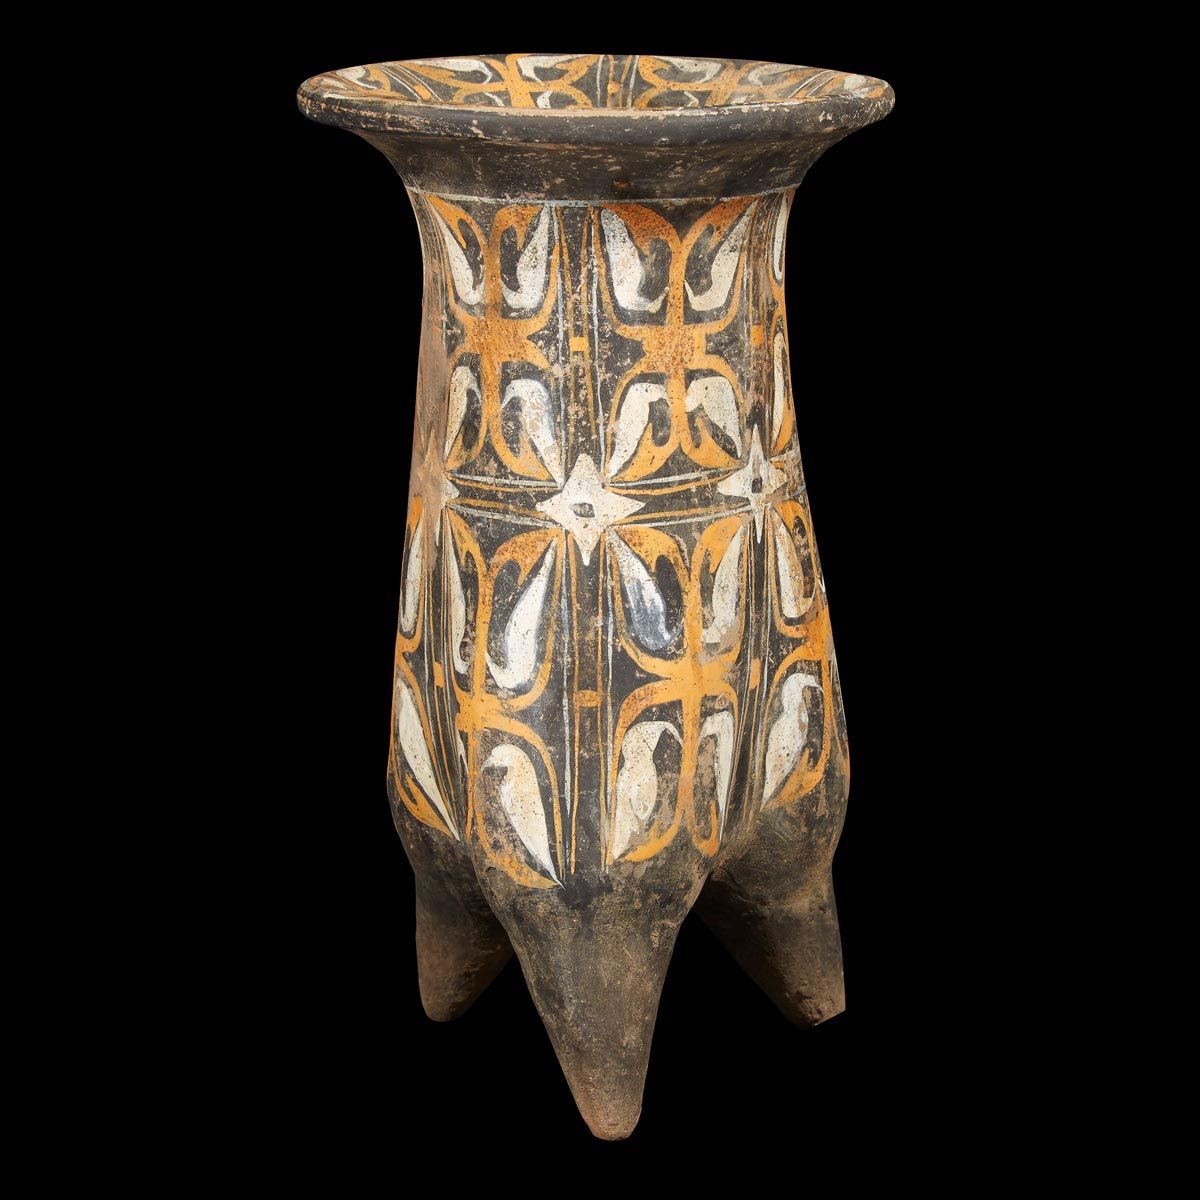 Lot 3: A rare late Neolithic painted black pottery tripod vessel, Inner Mongolia, Xiajiadian culture, circa 1500 B.C., $8,000-12,000 to be offered at Freeman's on March 12, 2019.